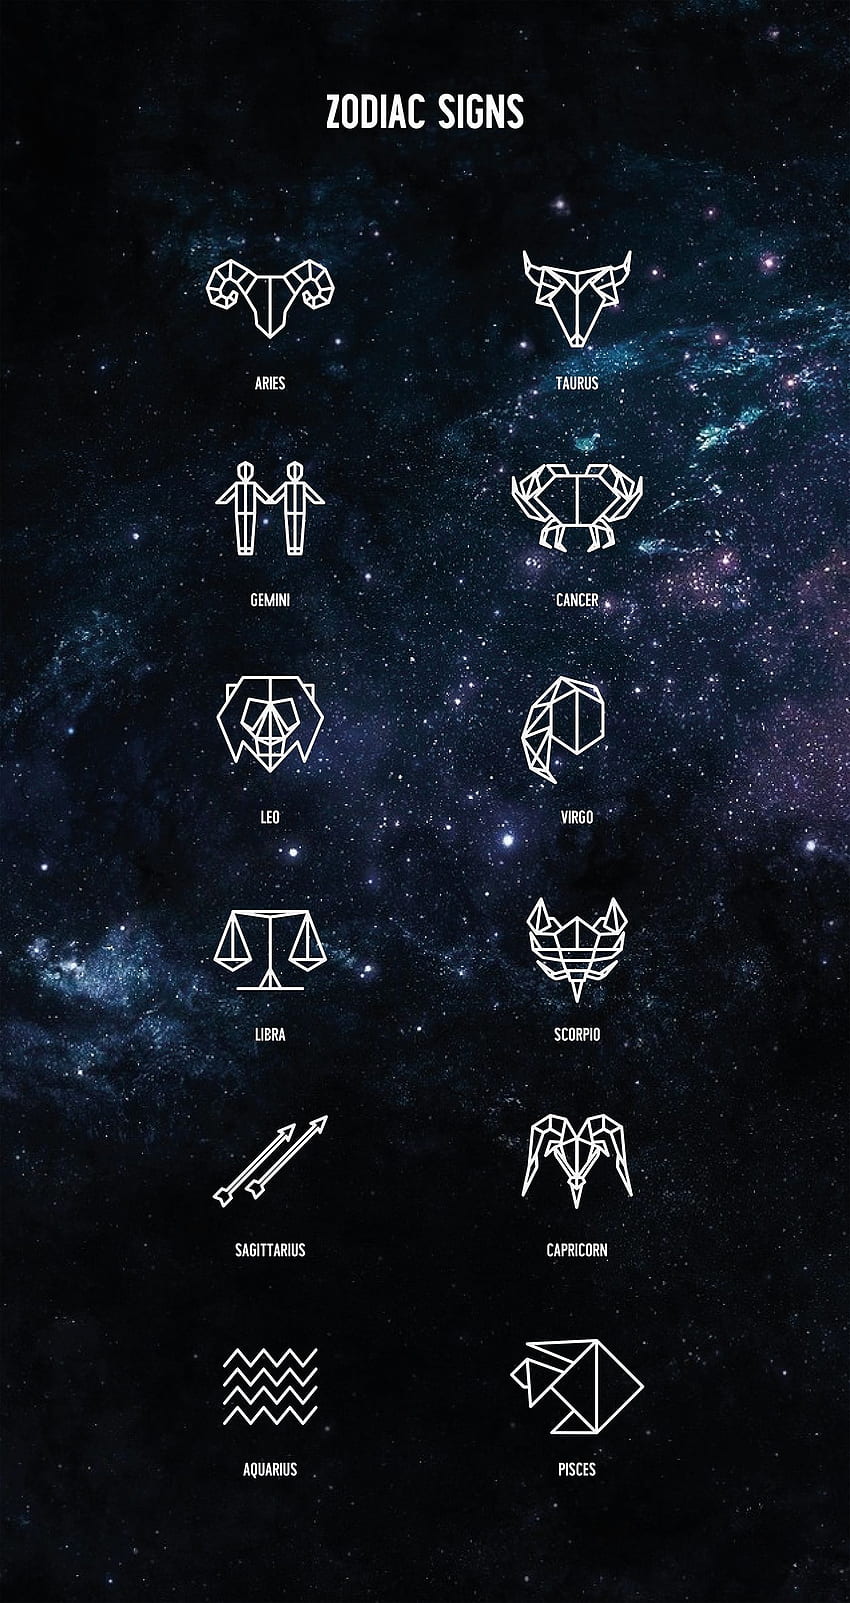 The 12 zodiac signs of astrology. - Cancer